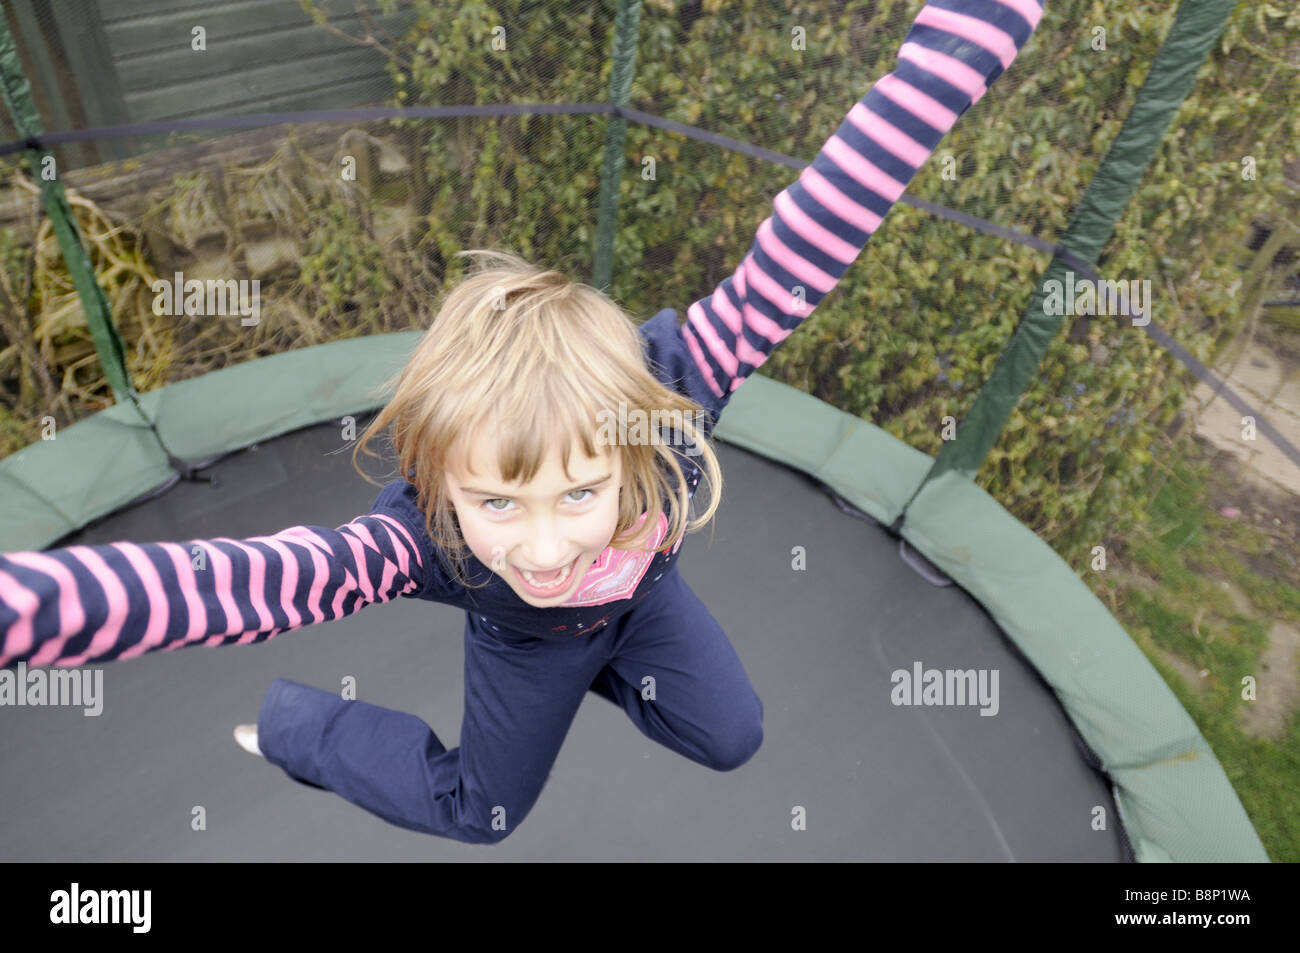 A six year old girl bouncing on a trampoline Stock Photo